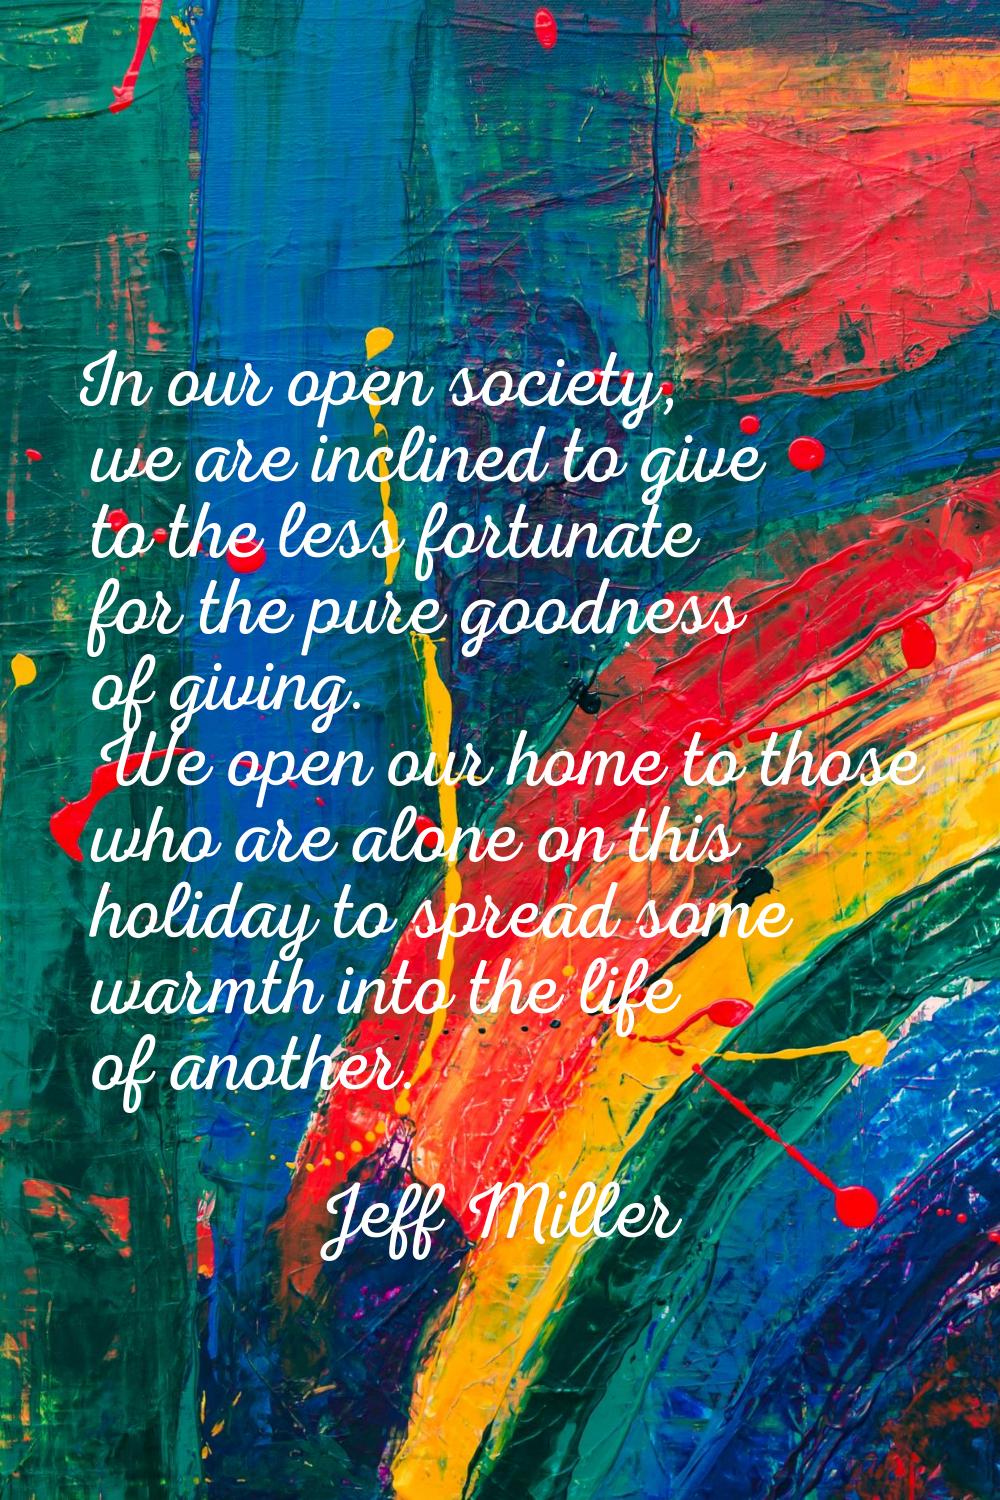 In our open society, we are inclined to give to the less fortunate for the pure goodness of giving.